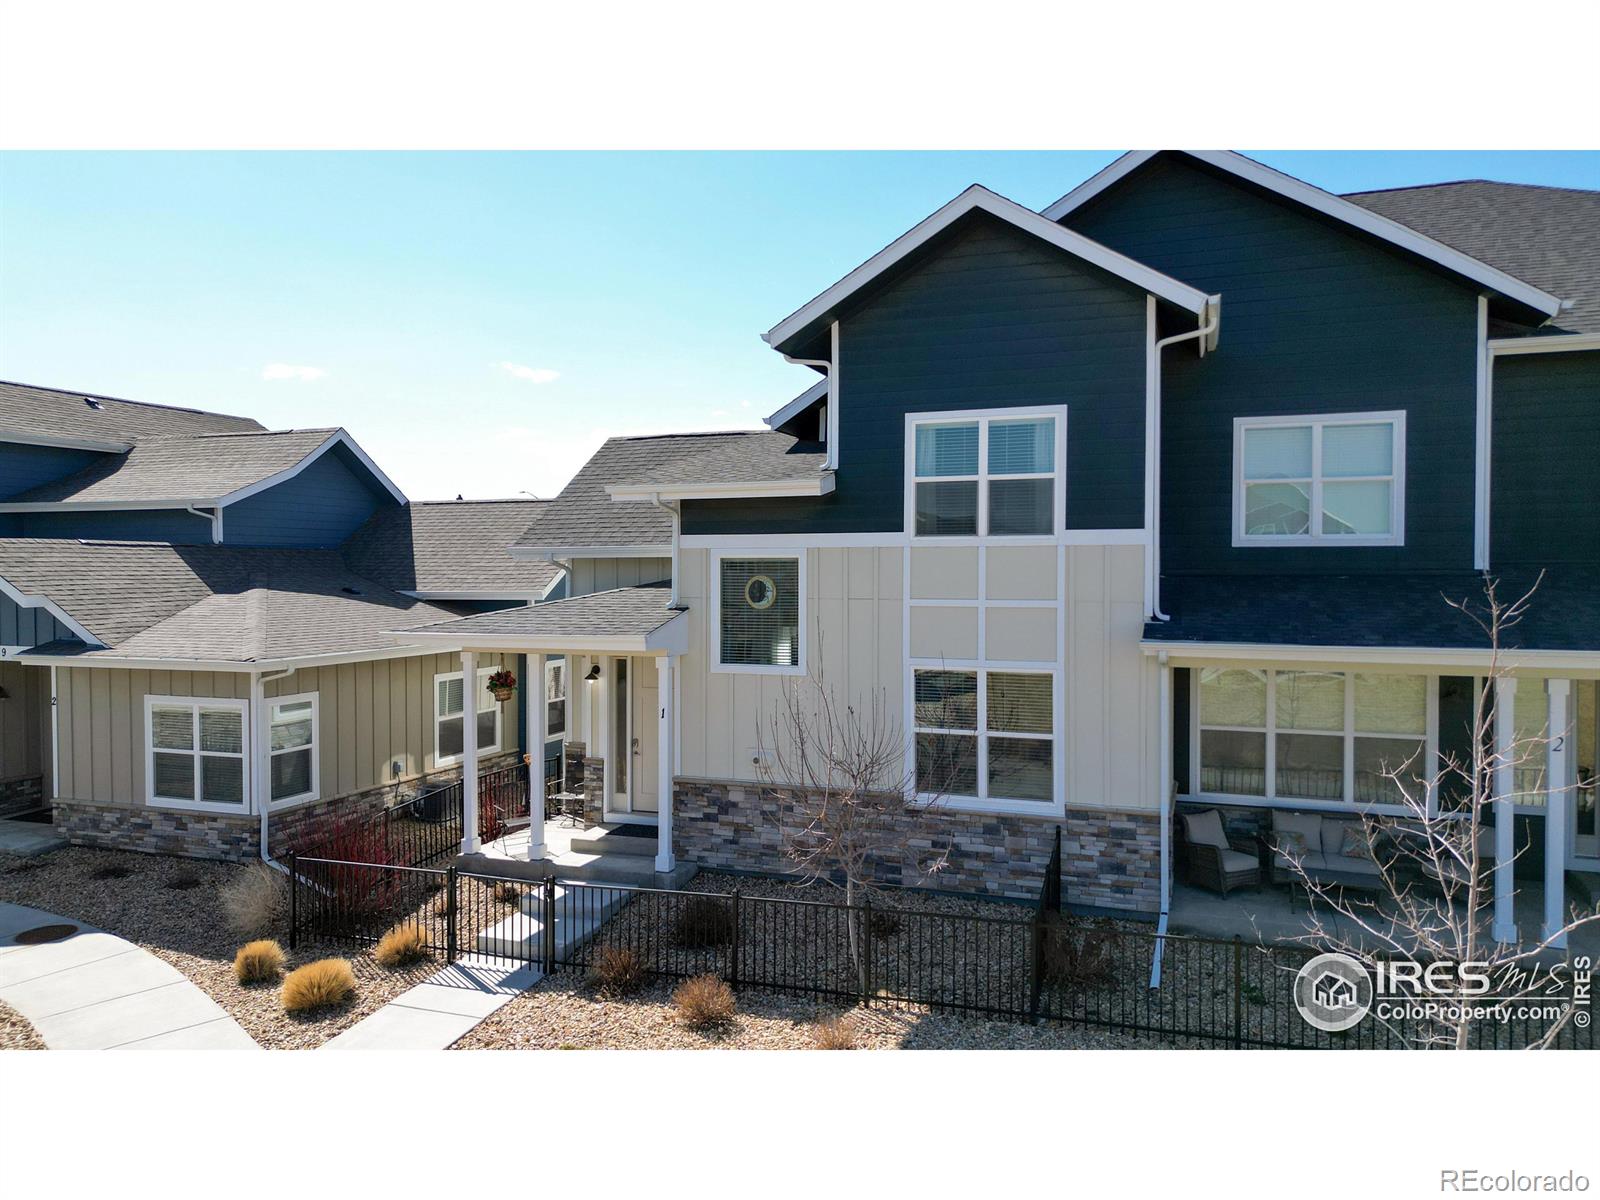 3313  Green Lake Drive, fort collins MLS: 4567891005500 Beds: 3 Baths: 3 Price: $450,000